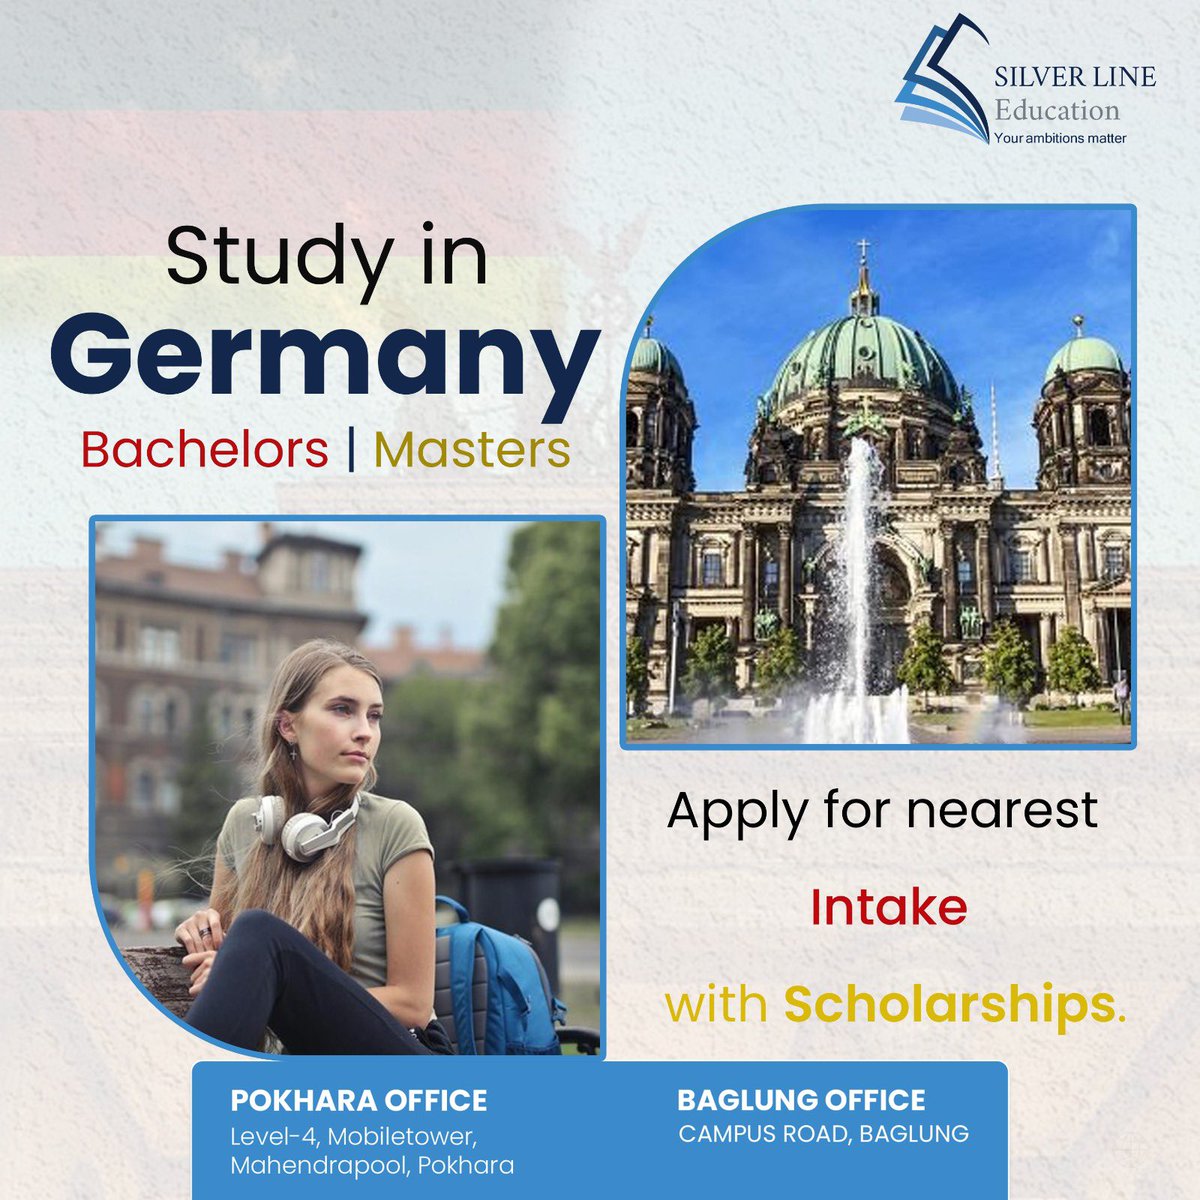 Study in Germany!!!
Apply for August Intake
Scholarships are available